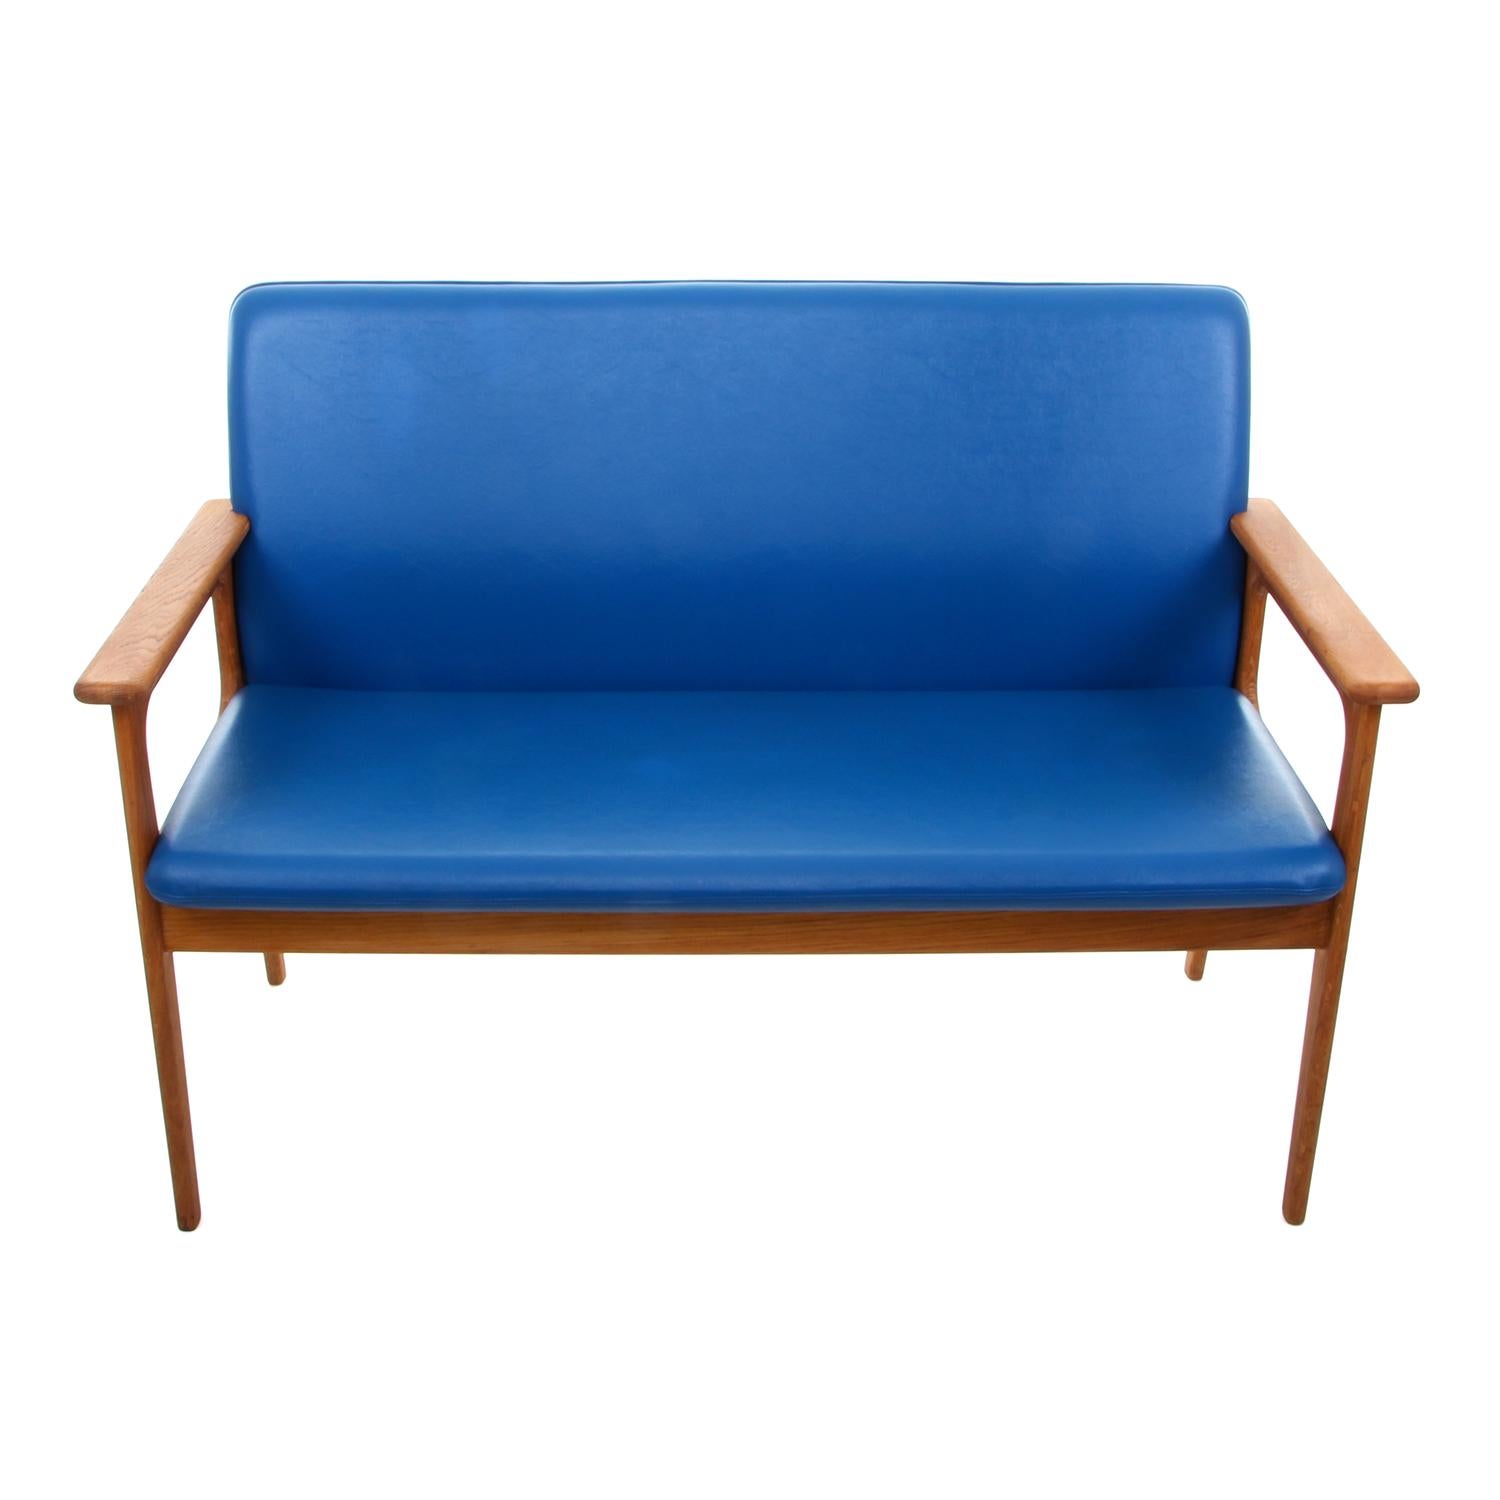 Scandinavian Modern Two-Seat Sofa by Erik Buch 1970s Oil-Treated Oak Couch with Clear Blue Upholster